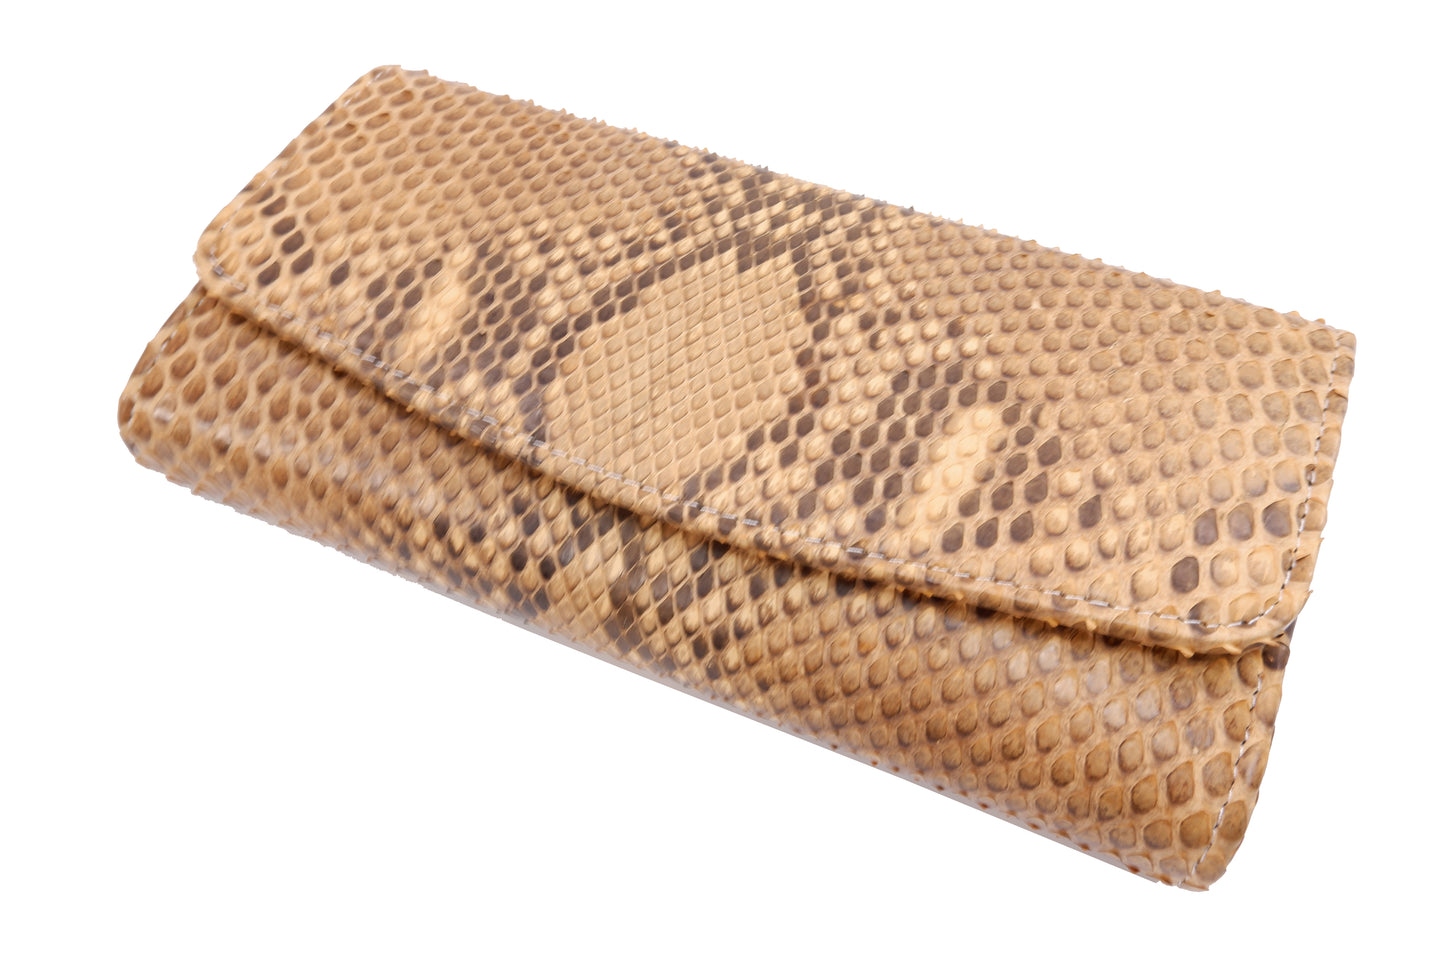 Genuine Reticulated Python Snake Skin Leather Women's Trifold Clutch Wallet Purse